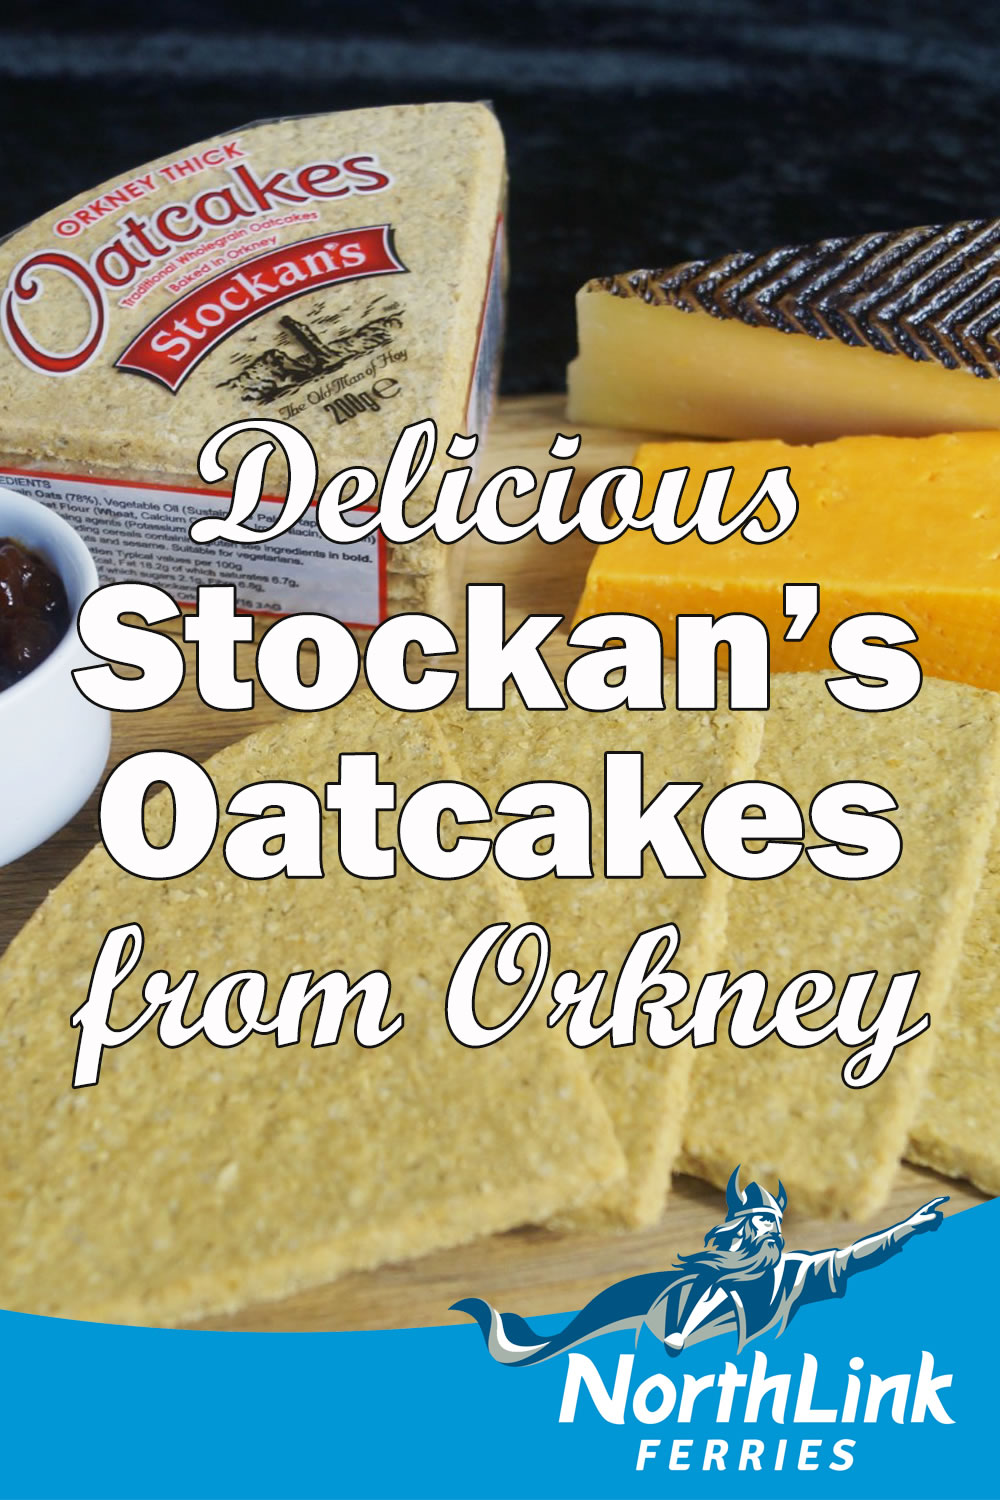 Delicious Stockan’s Oatcakes from Orkney